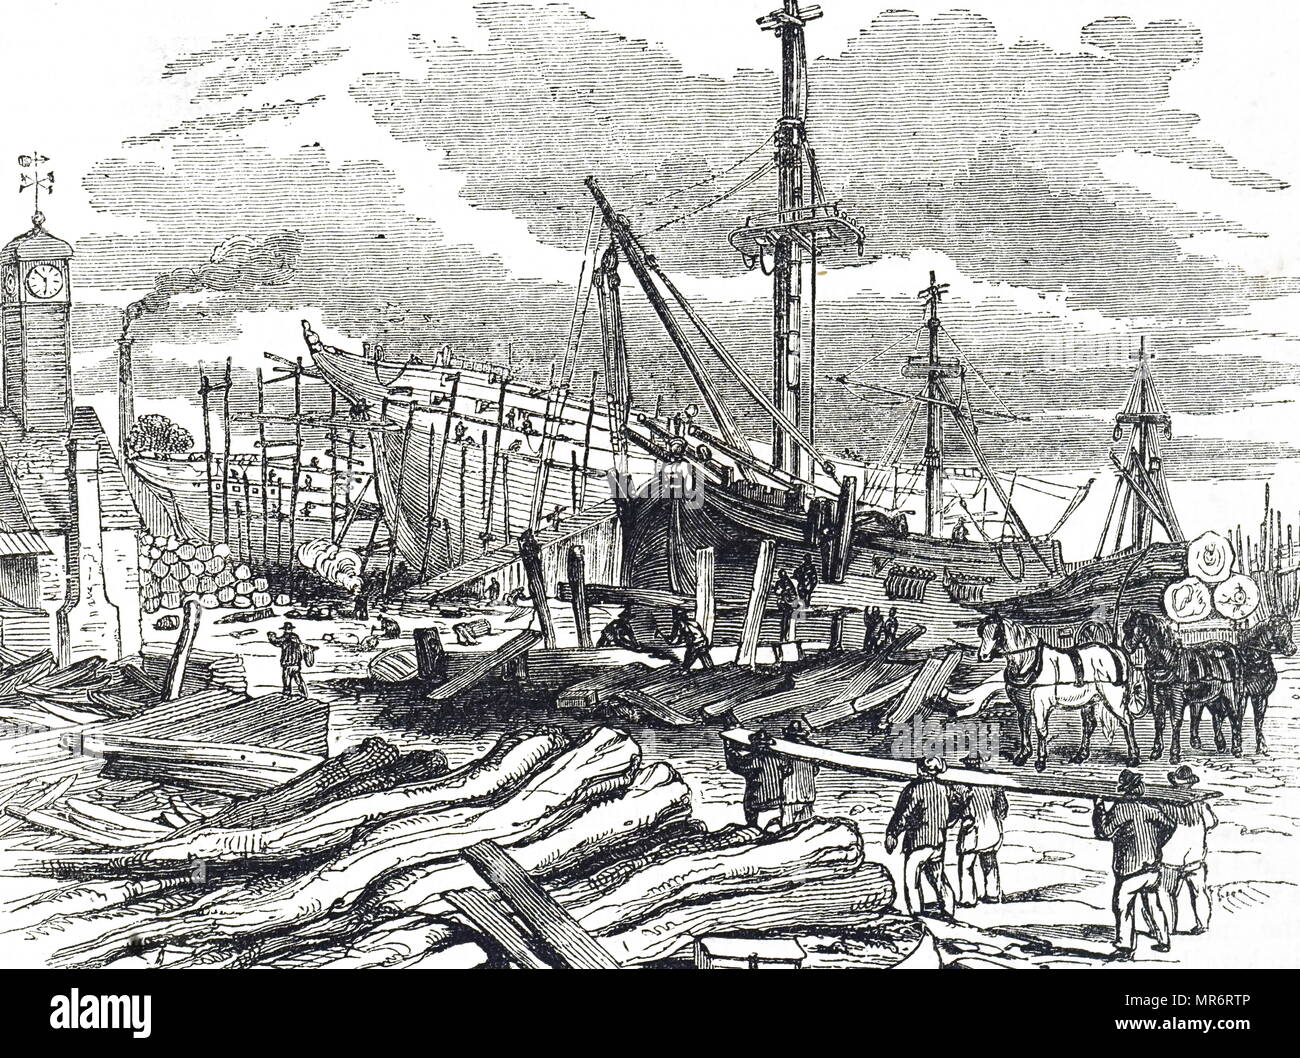 Engraving depicting a ship docked at Green, Wigram, and Green's Shipyard, Blackwall. Dated 19th century Stock Photo